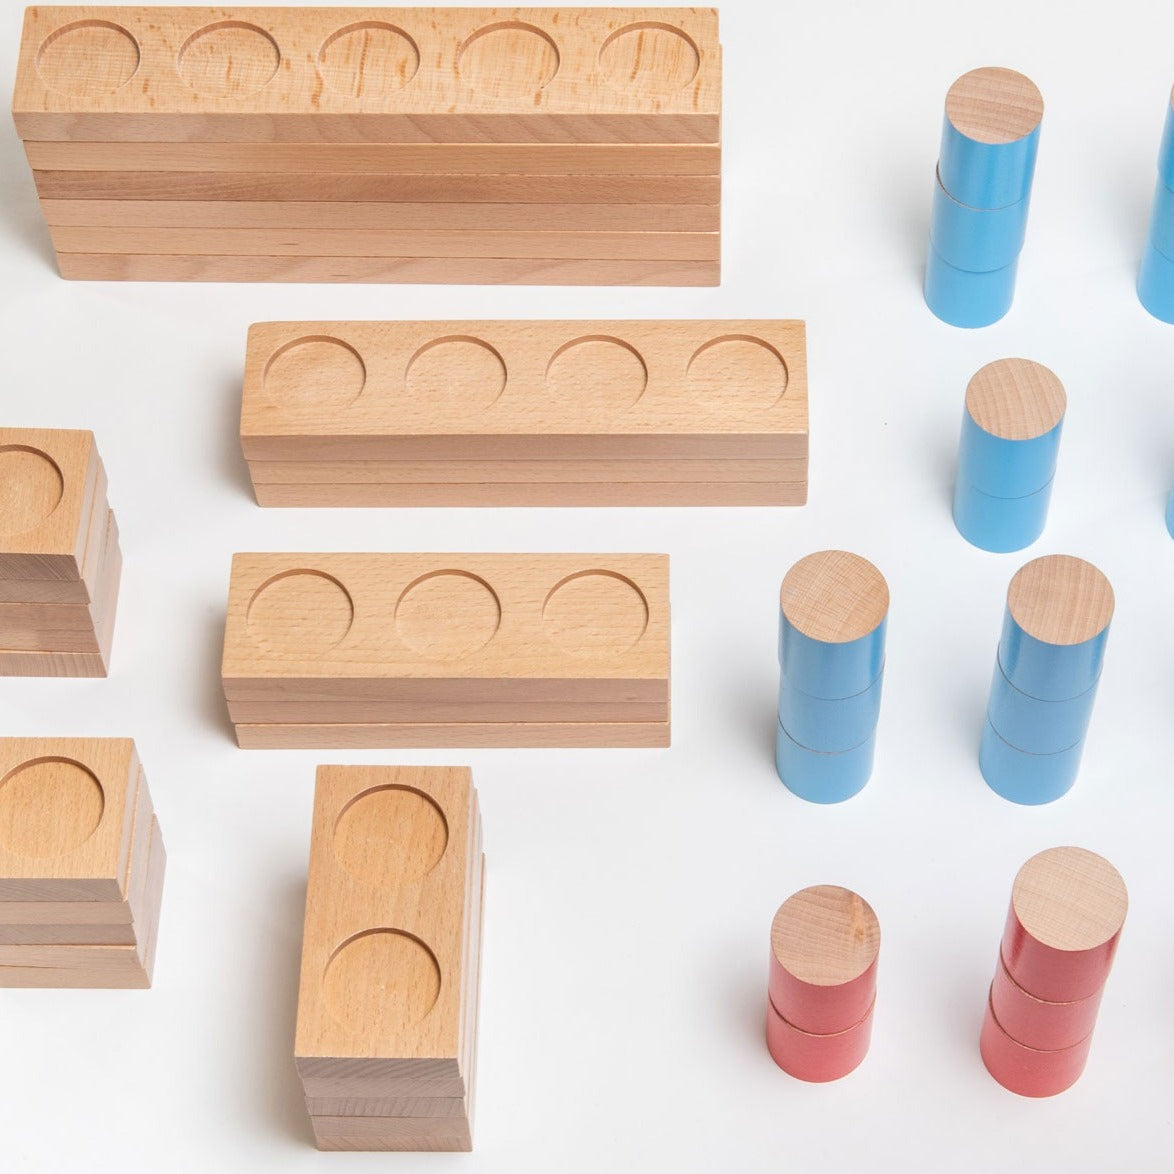 Wooden Counting Blocks,Enhance Early Mathematical Skills with Wooden Counting Blocks Introduce young learners to the fundamentals of mathematics with the Wooden Counting Blocks set, designed to facilitate early mathematical education. This versatile set includes a variety of bases that can be arranged in multiple configurations, supporting learning in addition, subtraction, number bonds, and ten-frame work. Key Features: Versatile Learning Tool: The set offers a range of bases that can be positioned side by